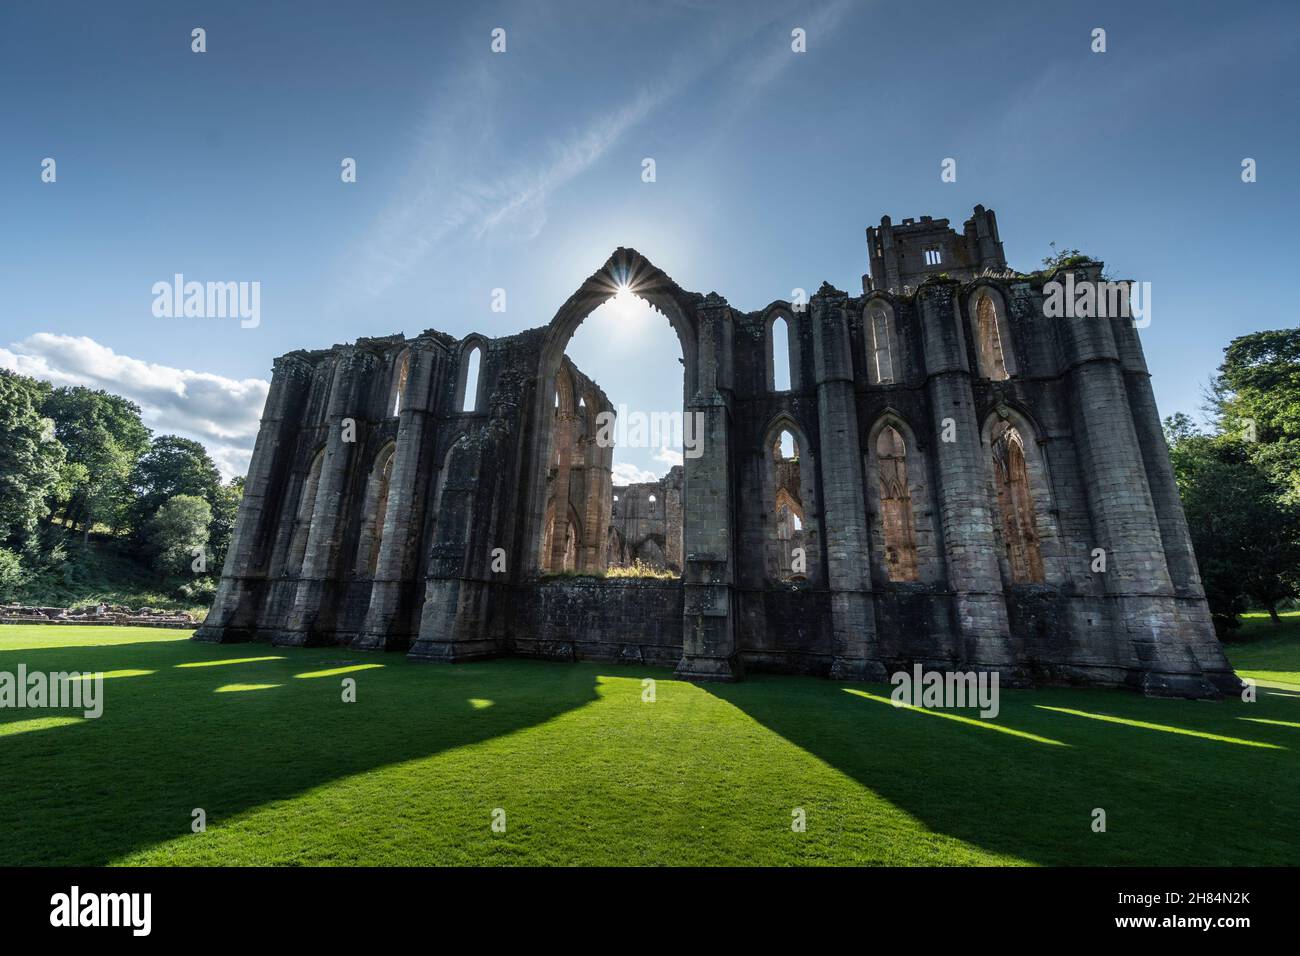 Fountains Abbey, Ripon, North Yorkshire, England - Cistercian abbey mostly dating from 13th to 15th centuries. Stock Photo